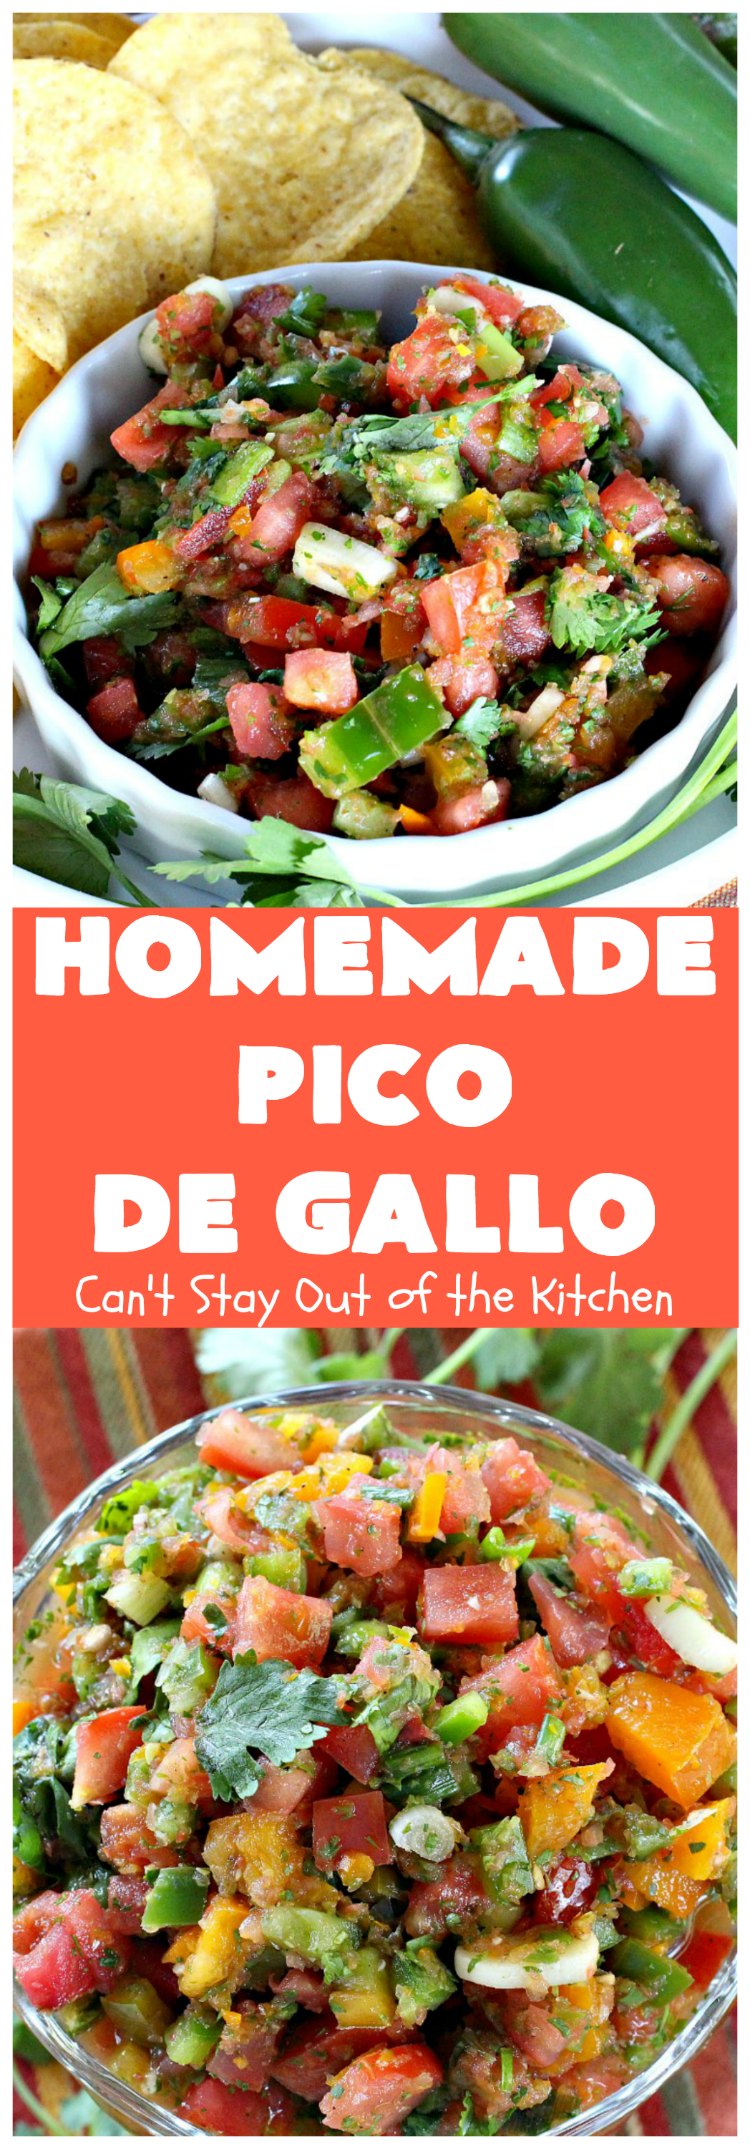 Homemade Pico De Gallo | Can't Stay Out of the Kitchen